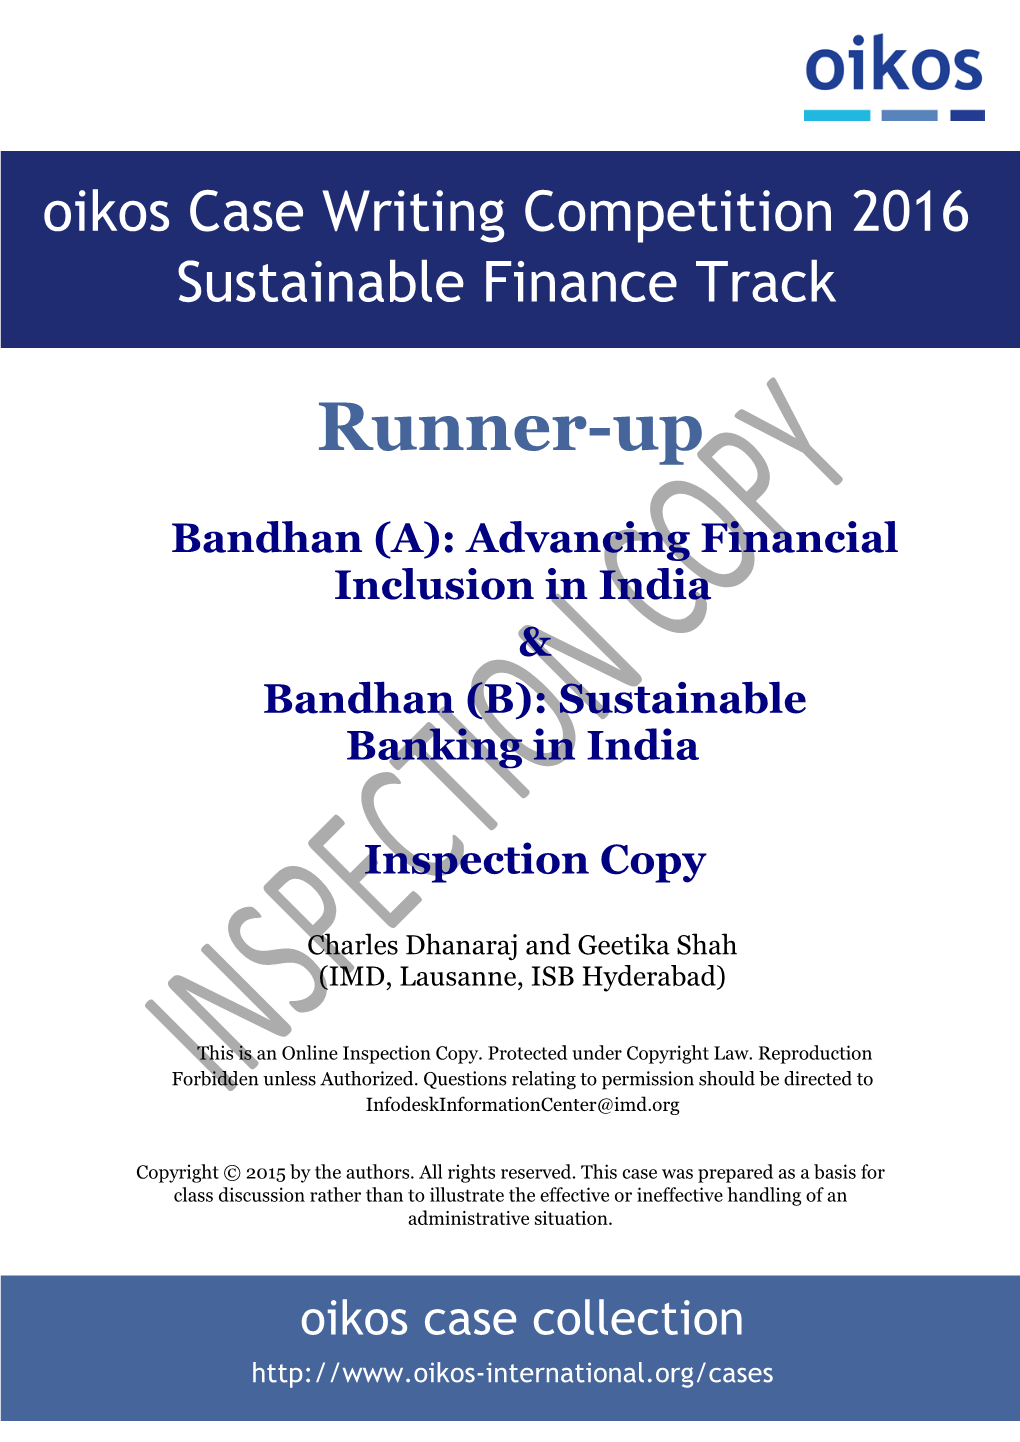 Bandhan (A): Advancing Financial Inclusion in India & Bandhan (B): Sustainable Banking in India